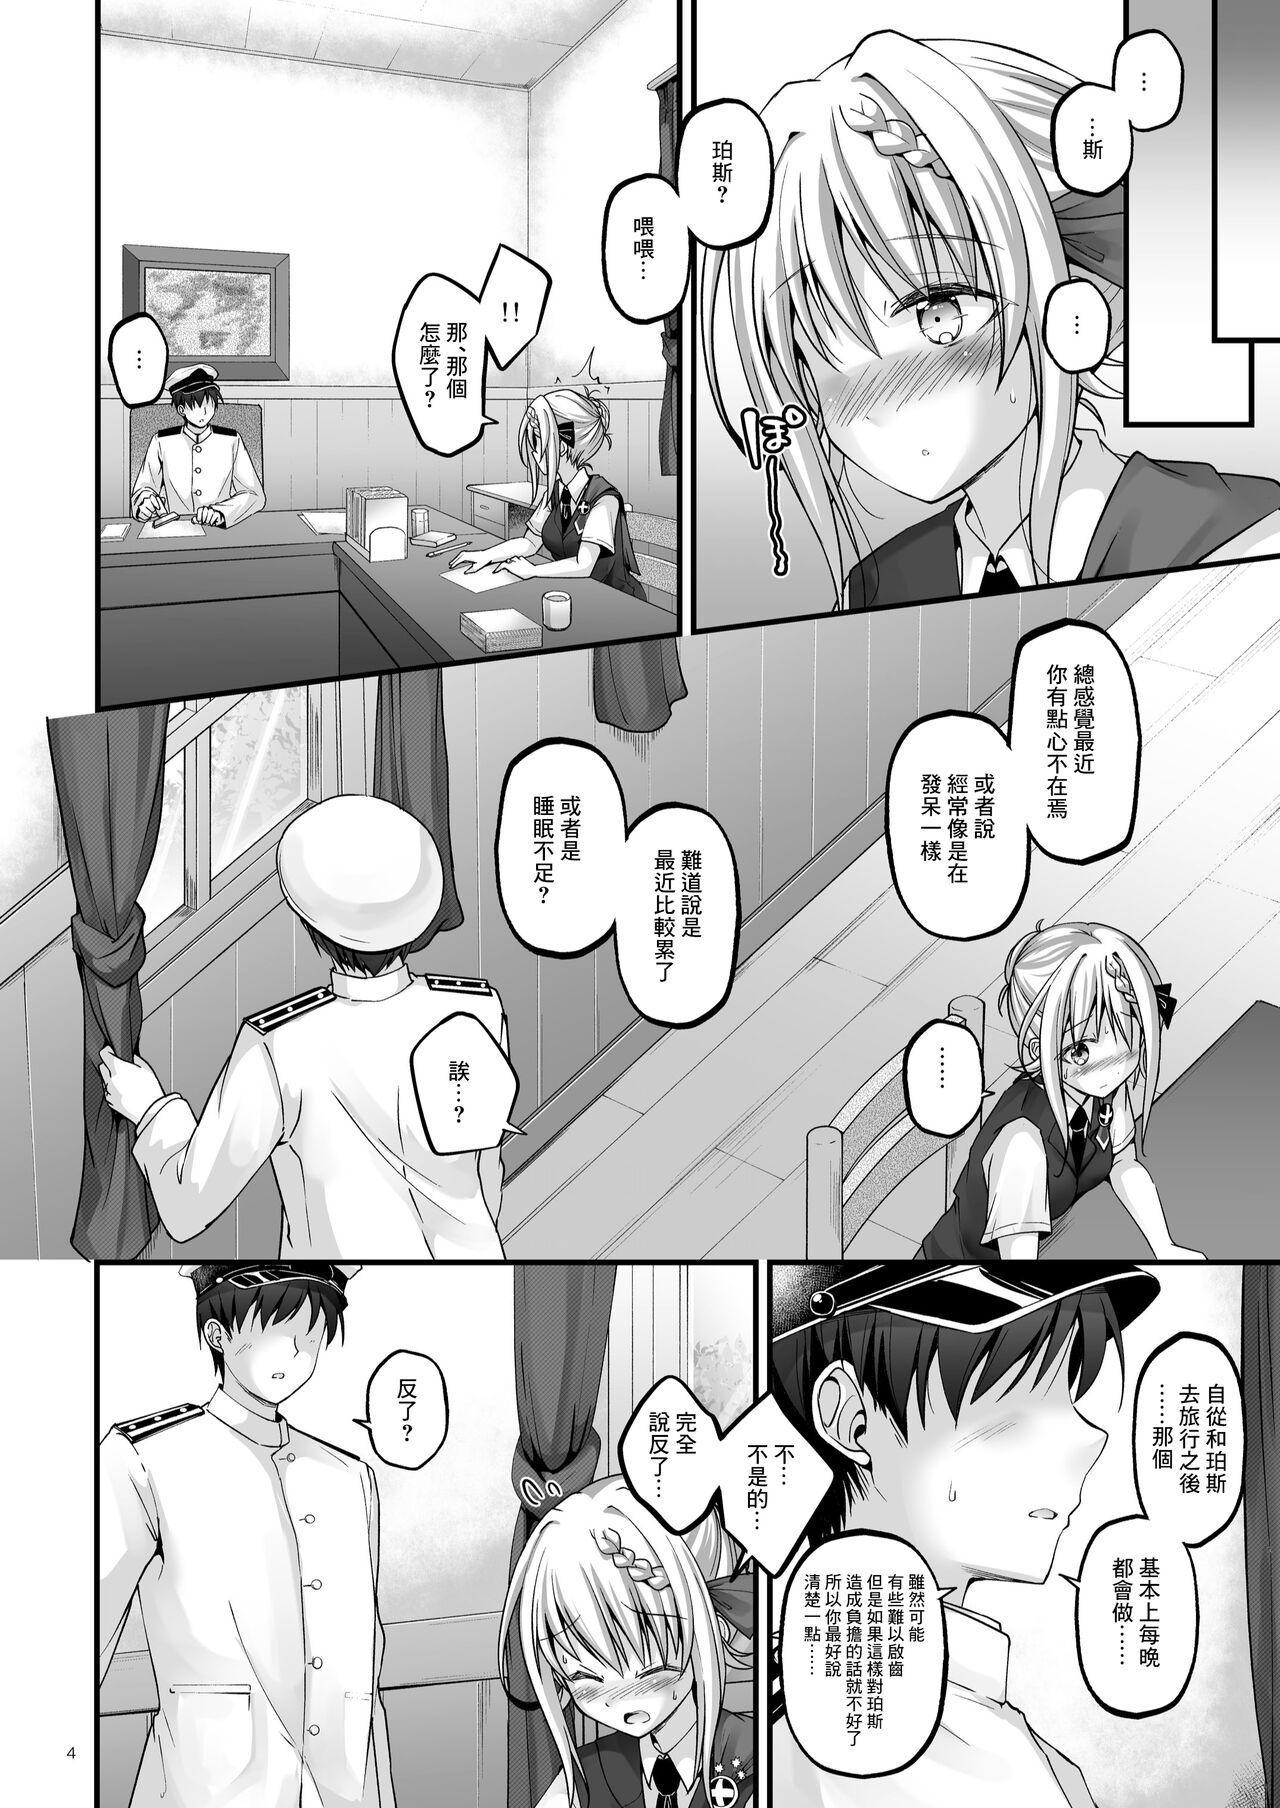 Load [Pixel Cot. (Habara Meguru)] Mitsugetsu Perth -AFTER- | 蜜月珀斯 -AFTER- (Kantai Collection -KanColle-) [Chinese] [Digital] - Kantai collection Free Amateur Porn - Page 4